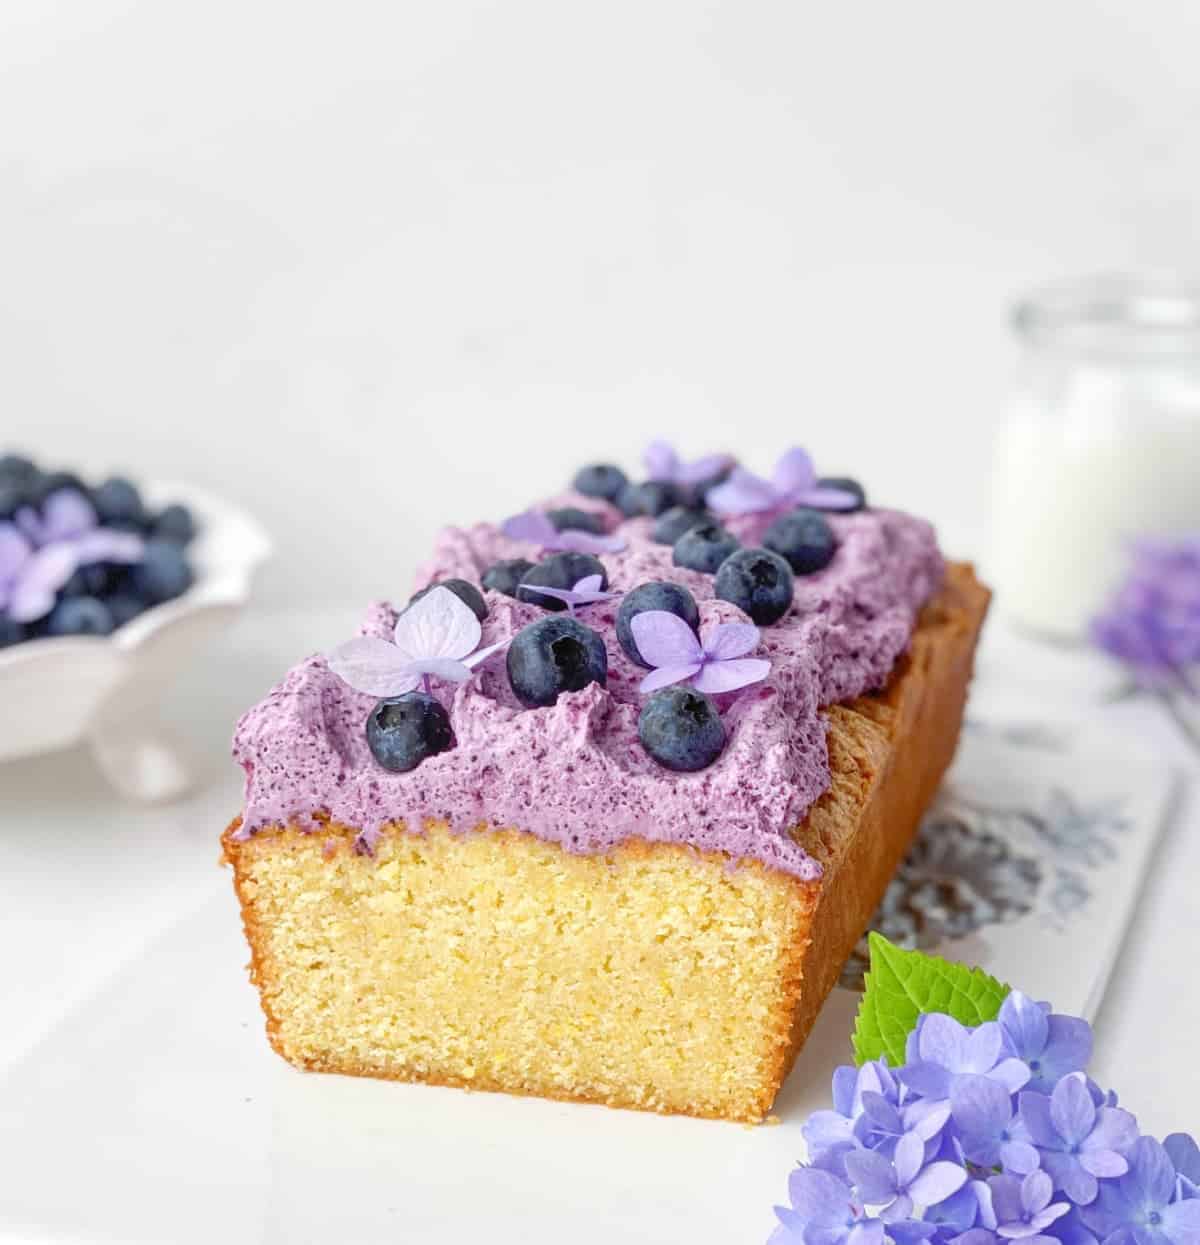 Closeup of sliced Cornmeal Pound Cake with Blueberry Whipped Cream, blueberries, and hydrangea flowers on top.